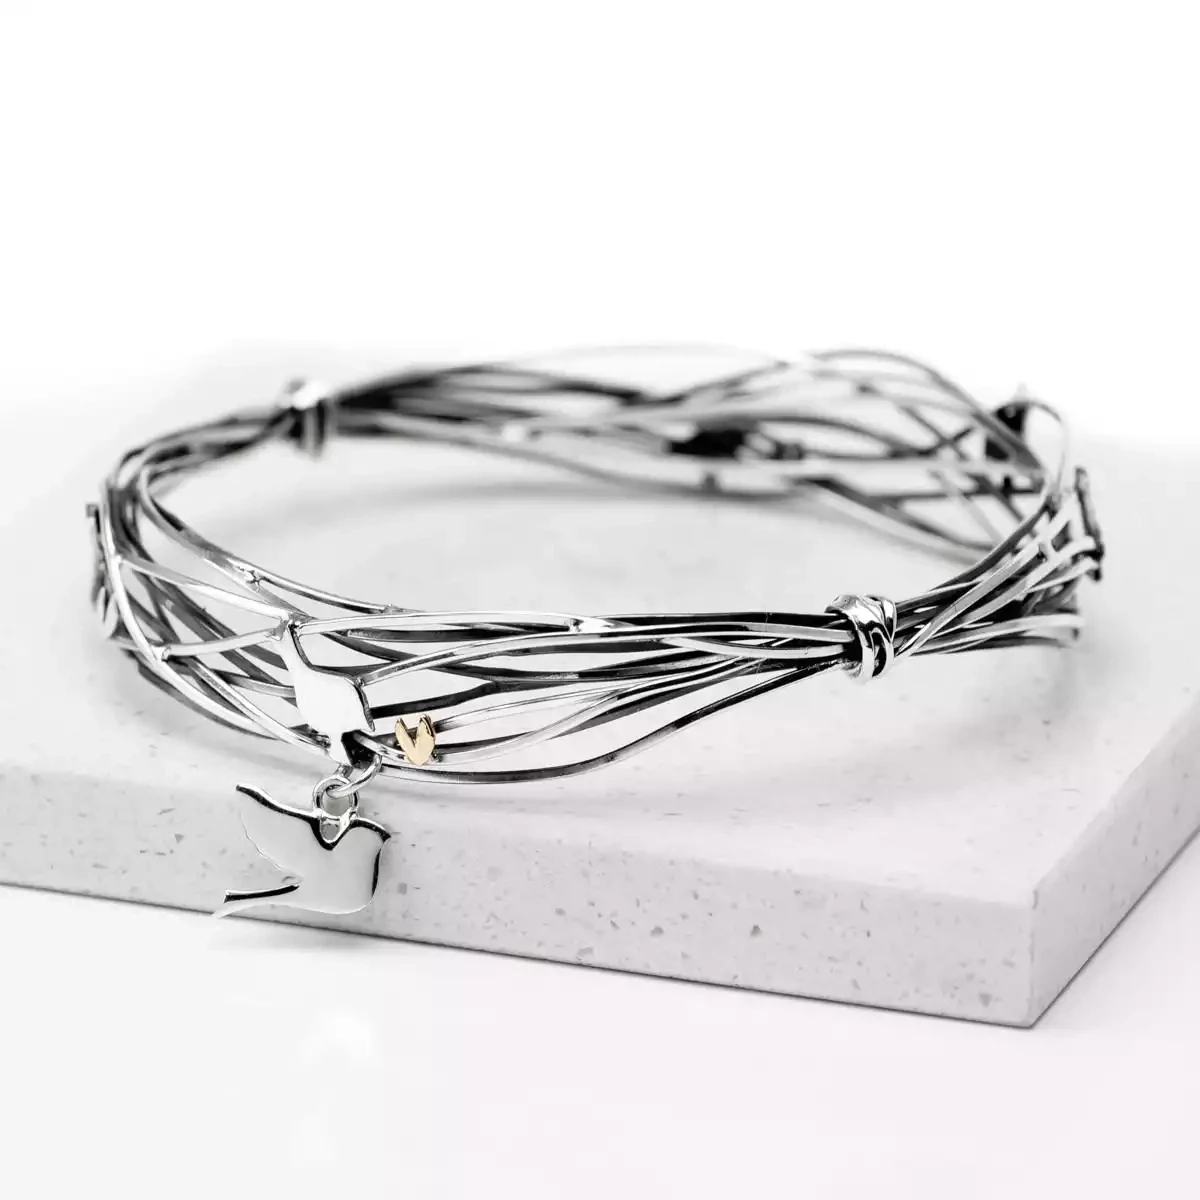 Three Little Birds Silver and Bangle by Linda Macdonald